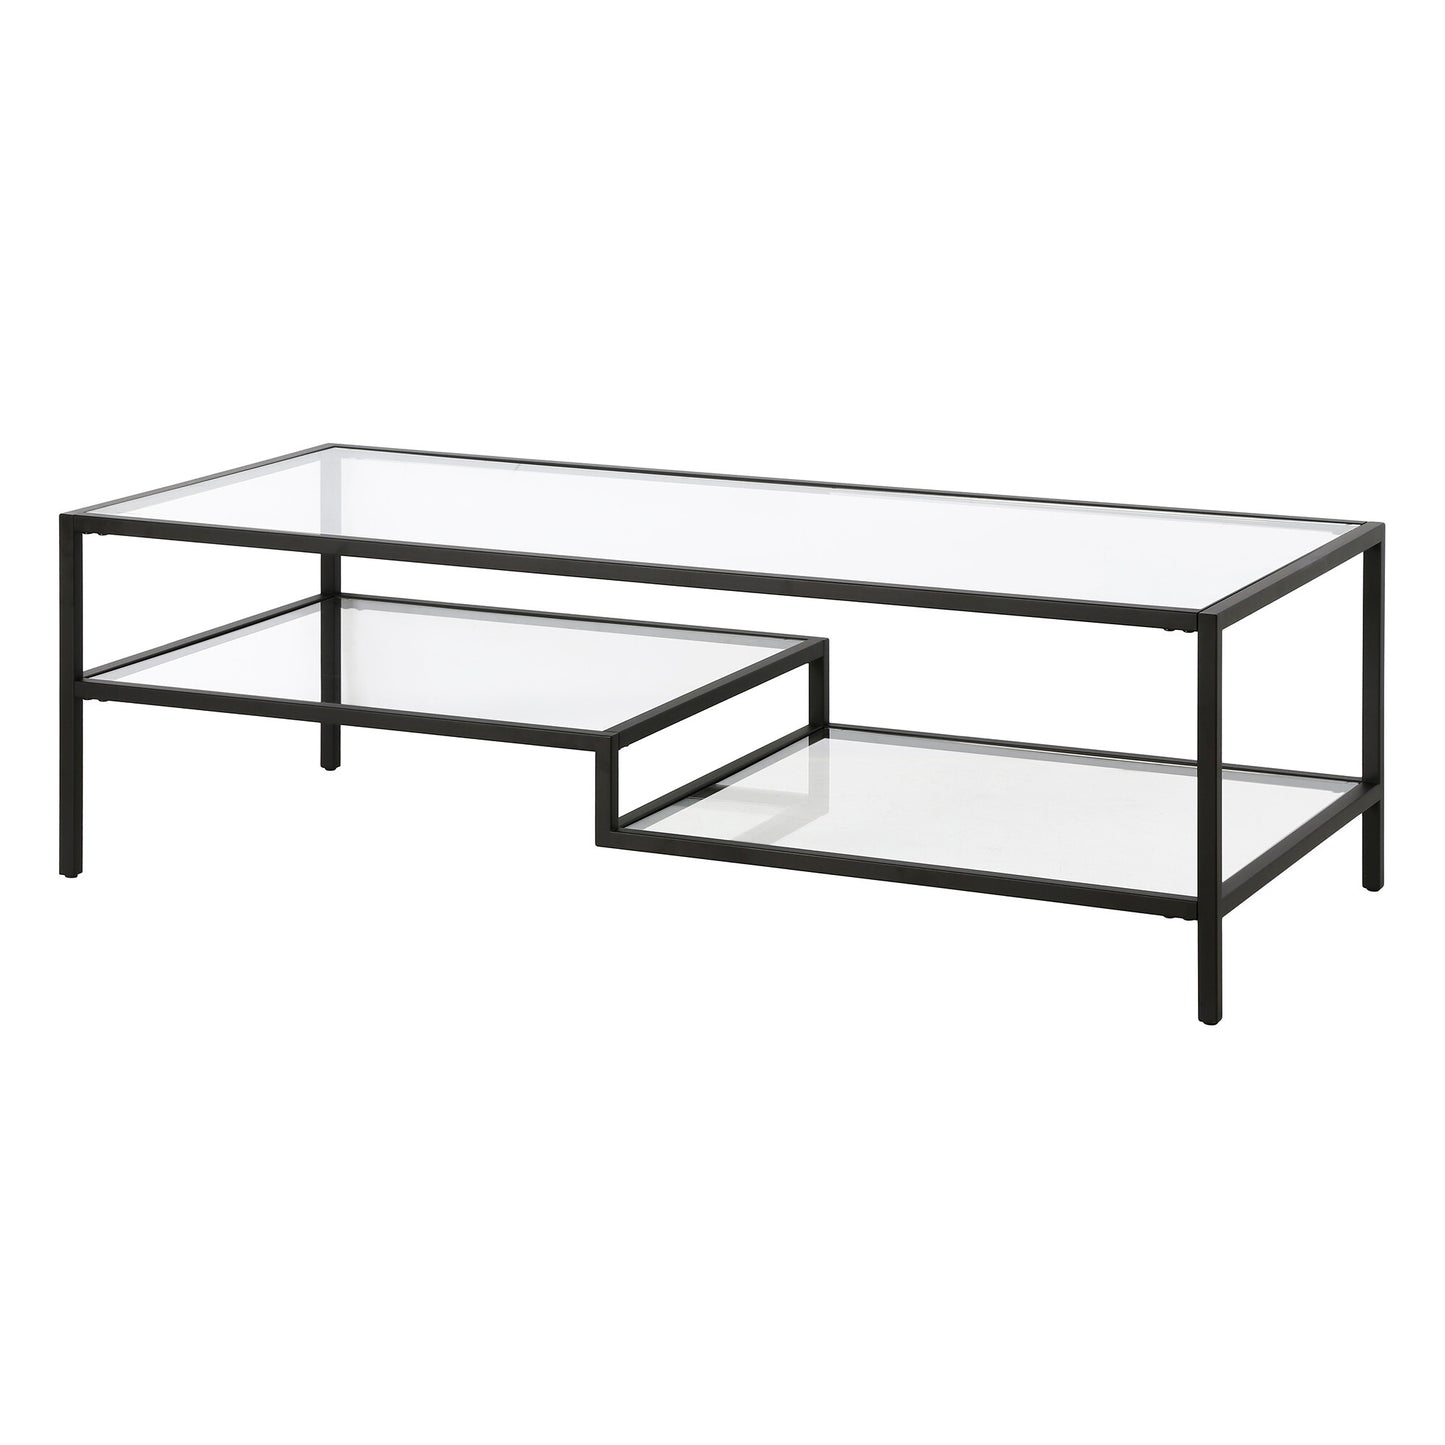 54" Black and Glass Rectangular Coffee Table With Two Shelves